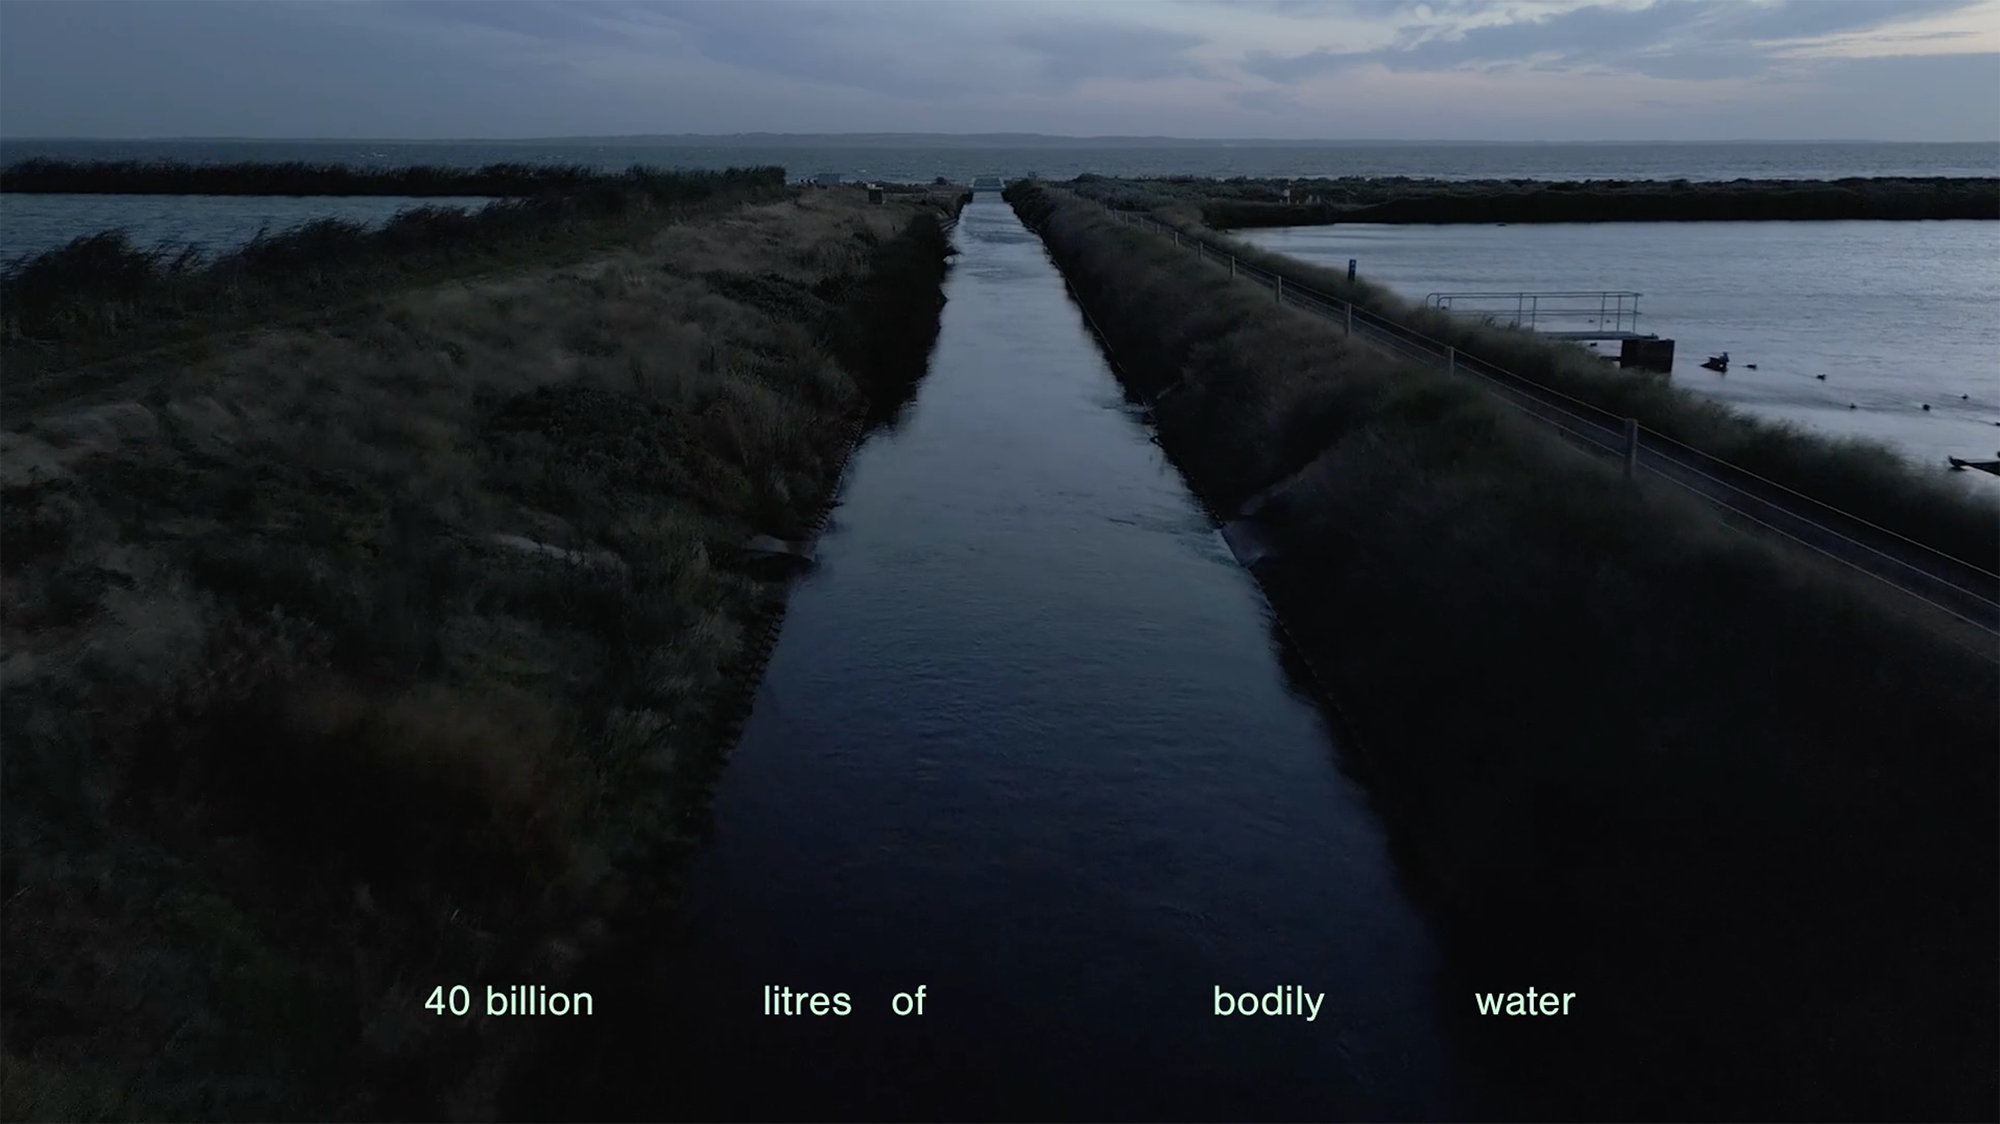 Video still from 'Metabolism' showing the 'open carrier', a channel of water, running out to the Port Phillip Bay at dusk. Text at the base of the frame says '40 billion litres of bodily water'.